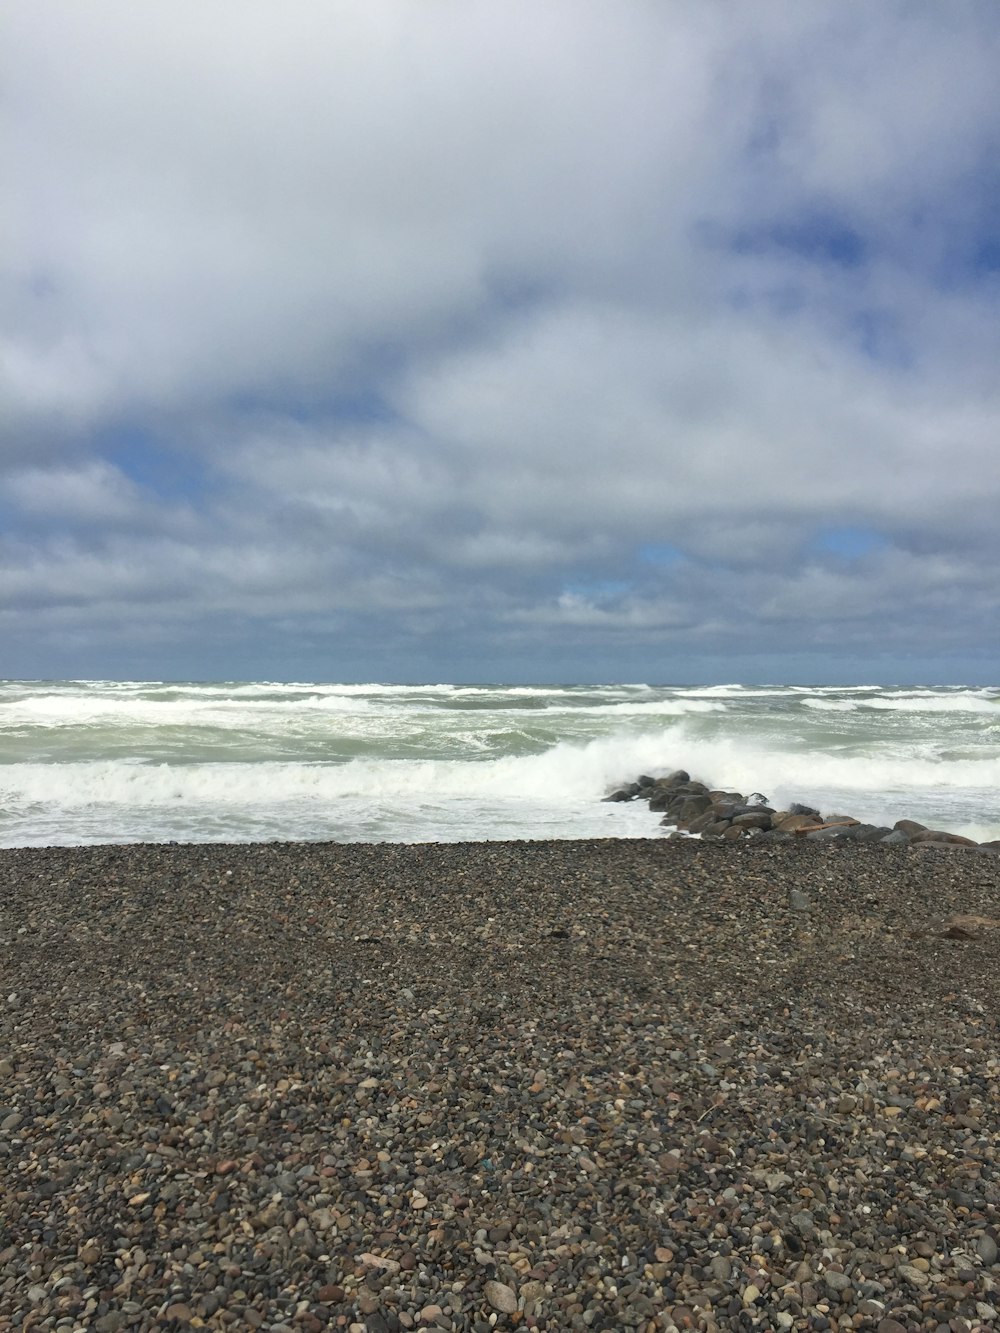 ocean waves crashing on shore under cloudy sky during daytime